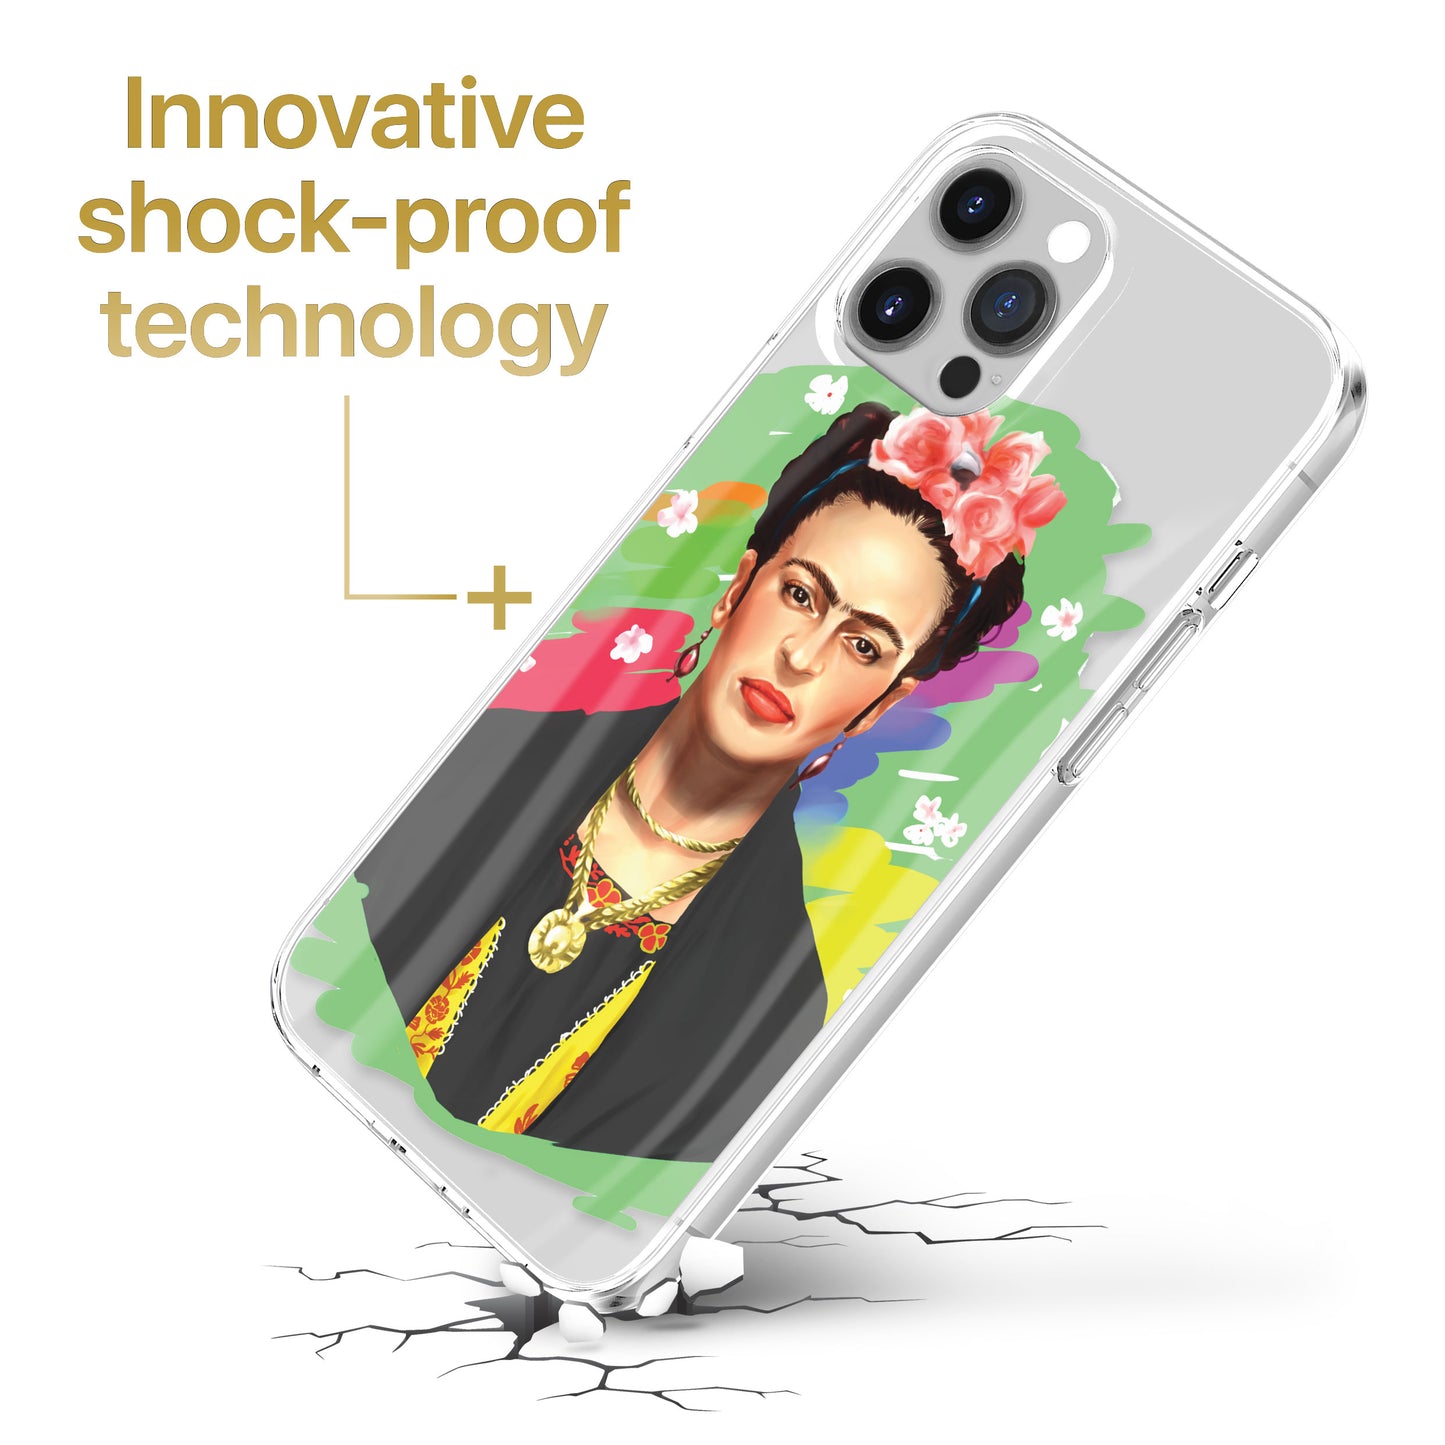 TPU Clear case with (Frida) Design for iPhone & Samsung Phones